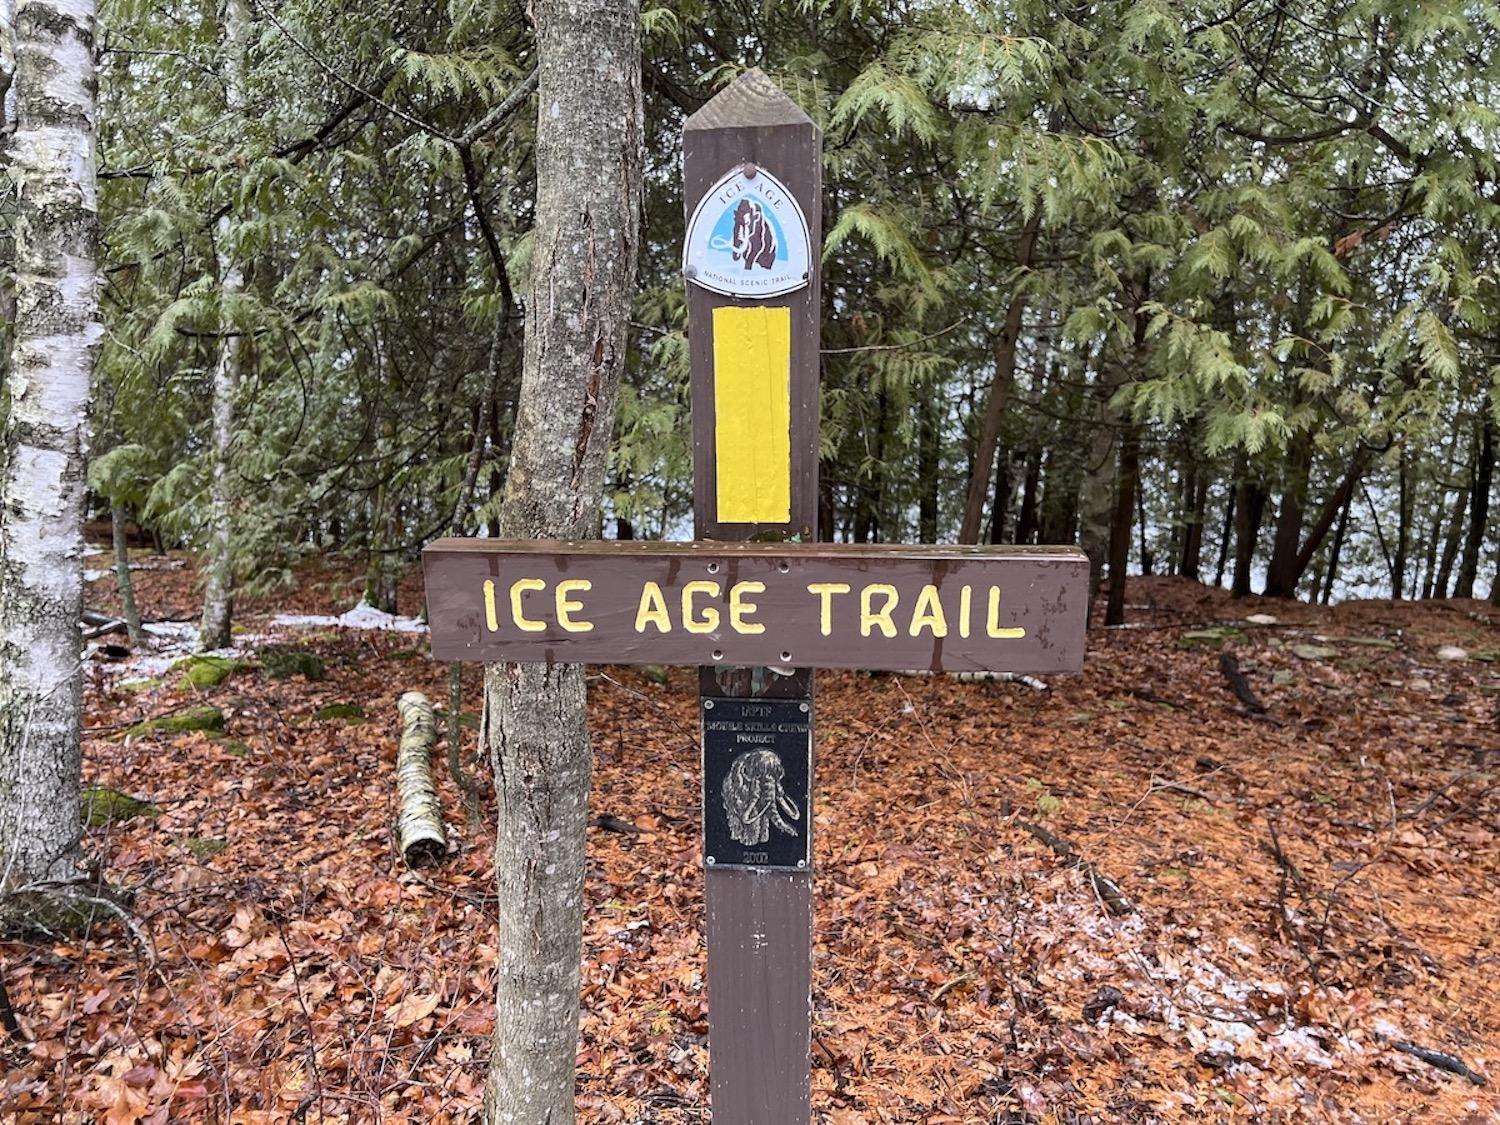 Ice Age National Scenic Trail is marked by yellow blazes.